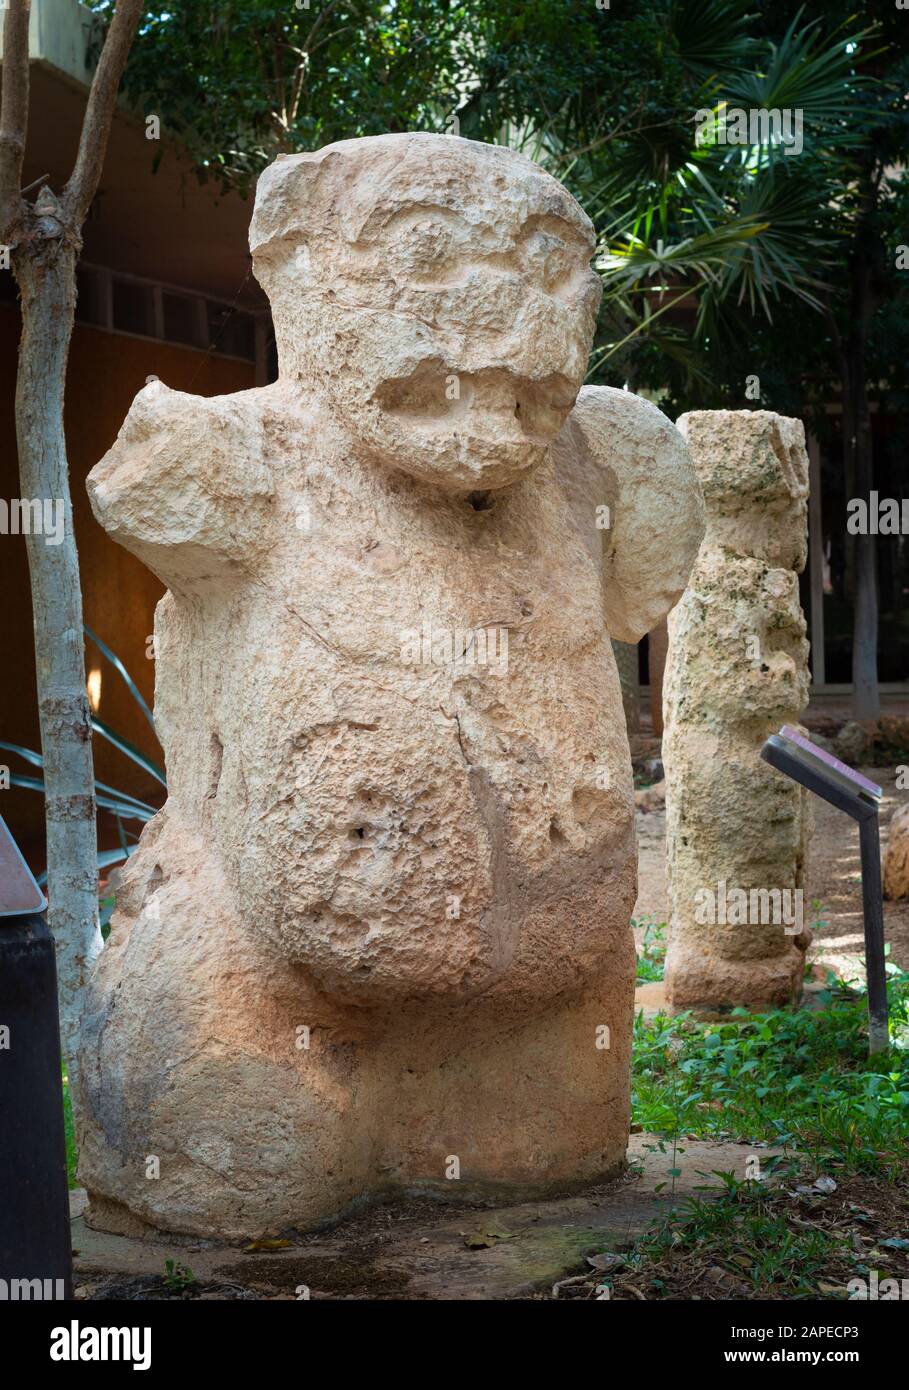 Late Classic period Maya sculpture at Dzibilchaltun archeological site, Yucatan. The sculpture shows a human figure with the head of a jaguar. Stock Photo